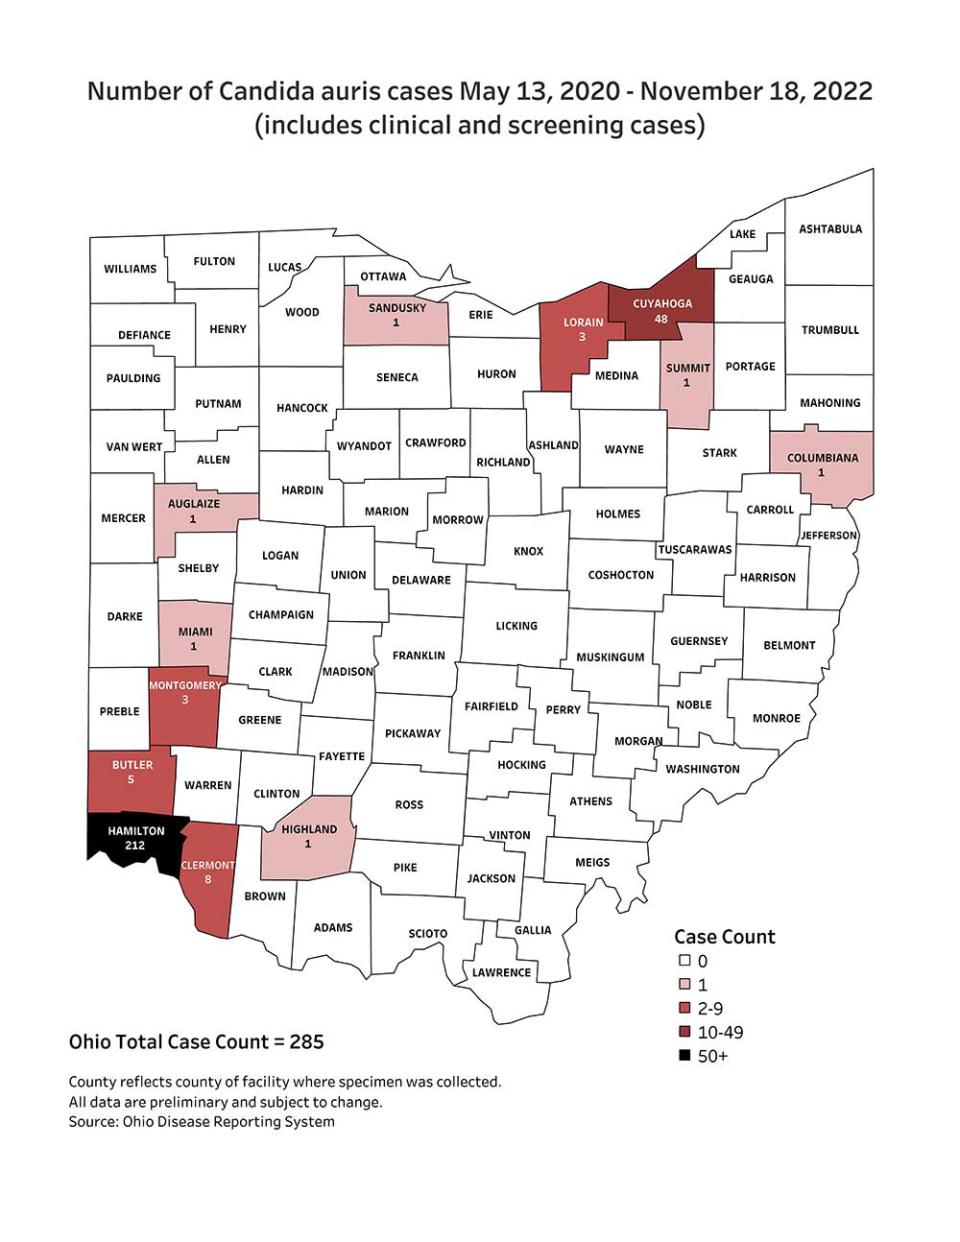 From May 13, 2020, to Nov. 18, 2022, there were 285 cases of Candida auris in Ohio. Of those, all but four were near Cincinnati, Cleveland and Dayton.